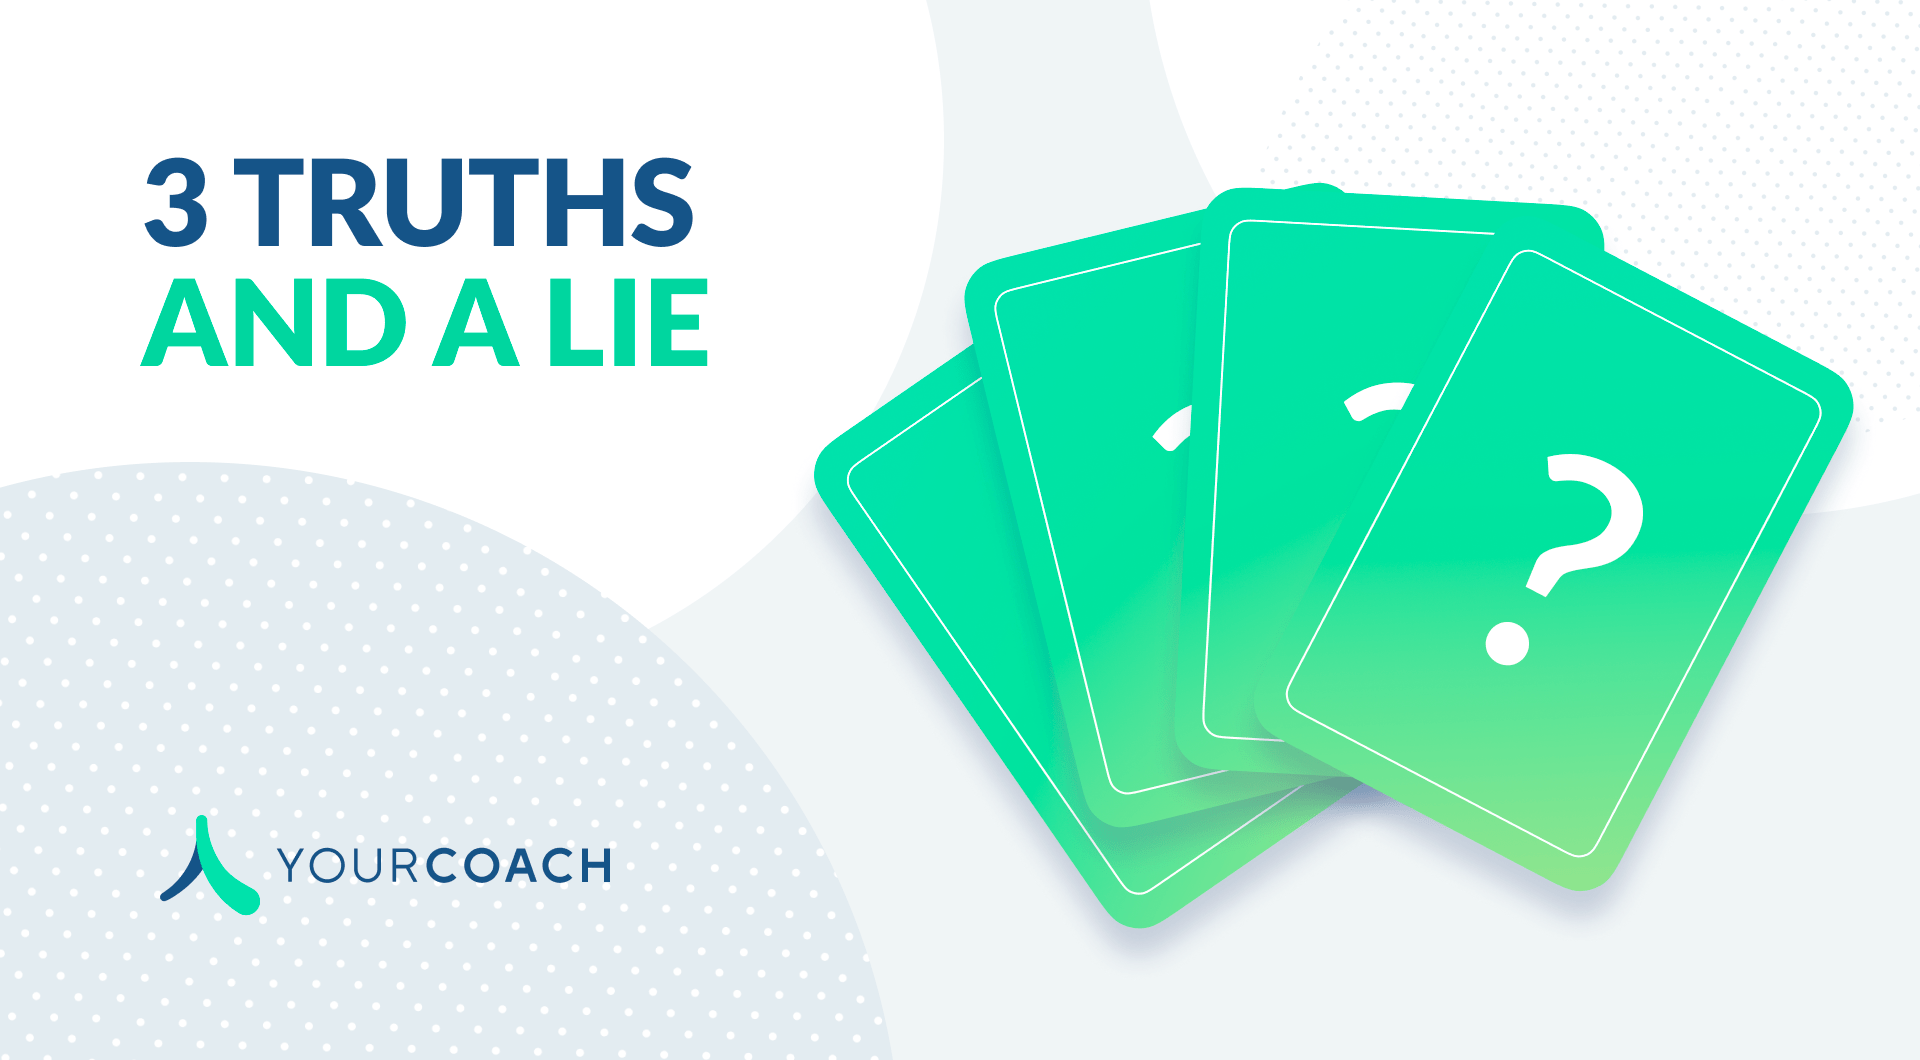 Get to Know YourCoach - Three Truths and a Lie